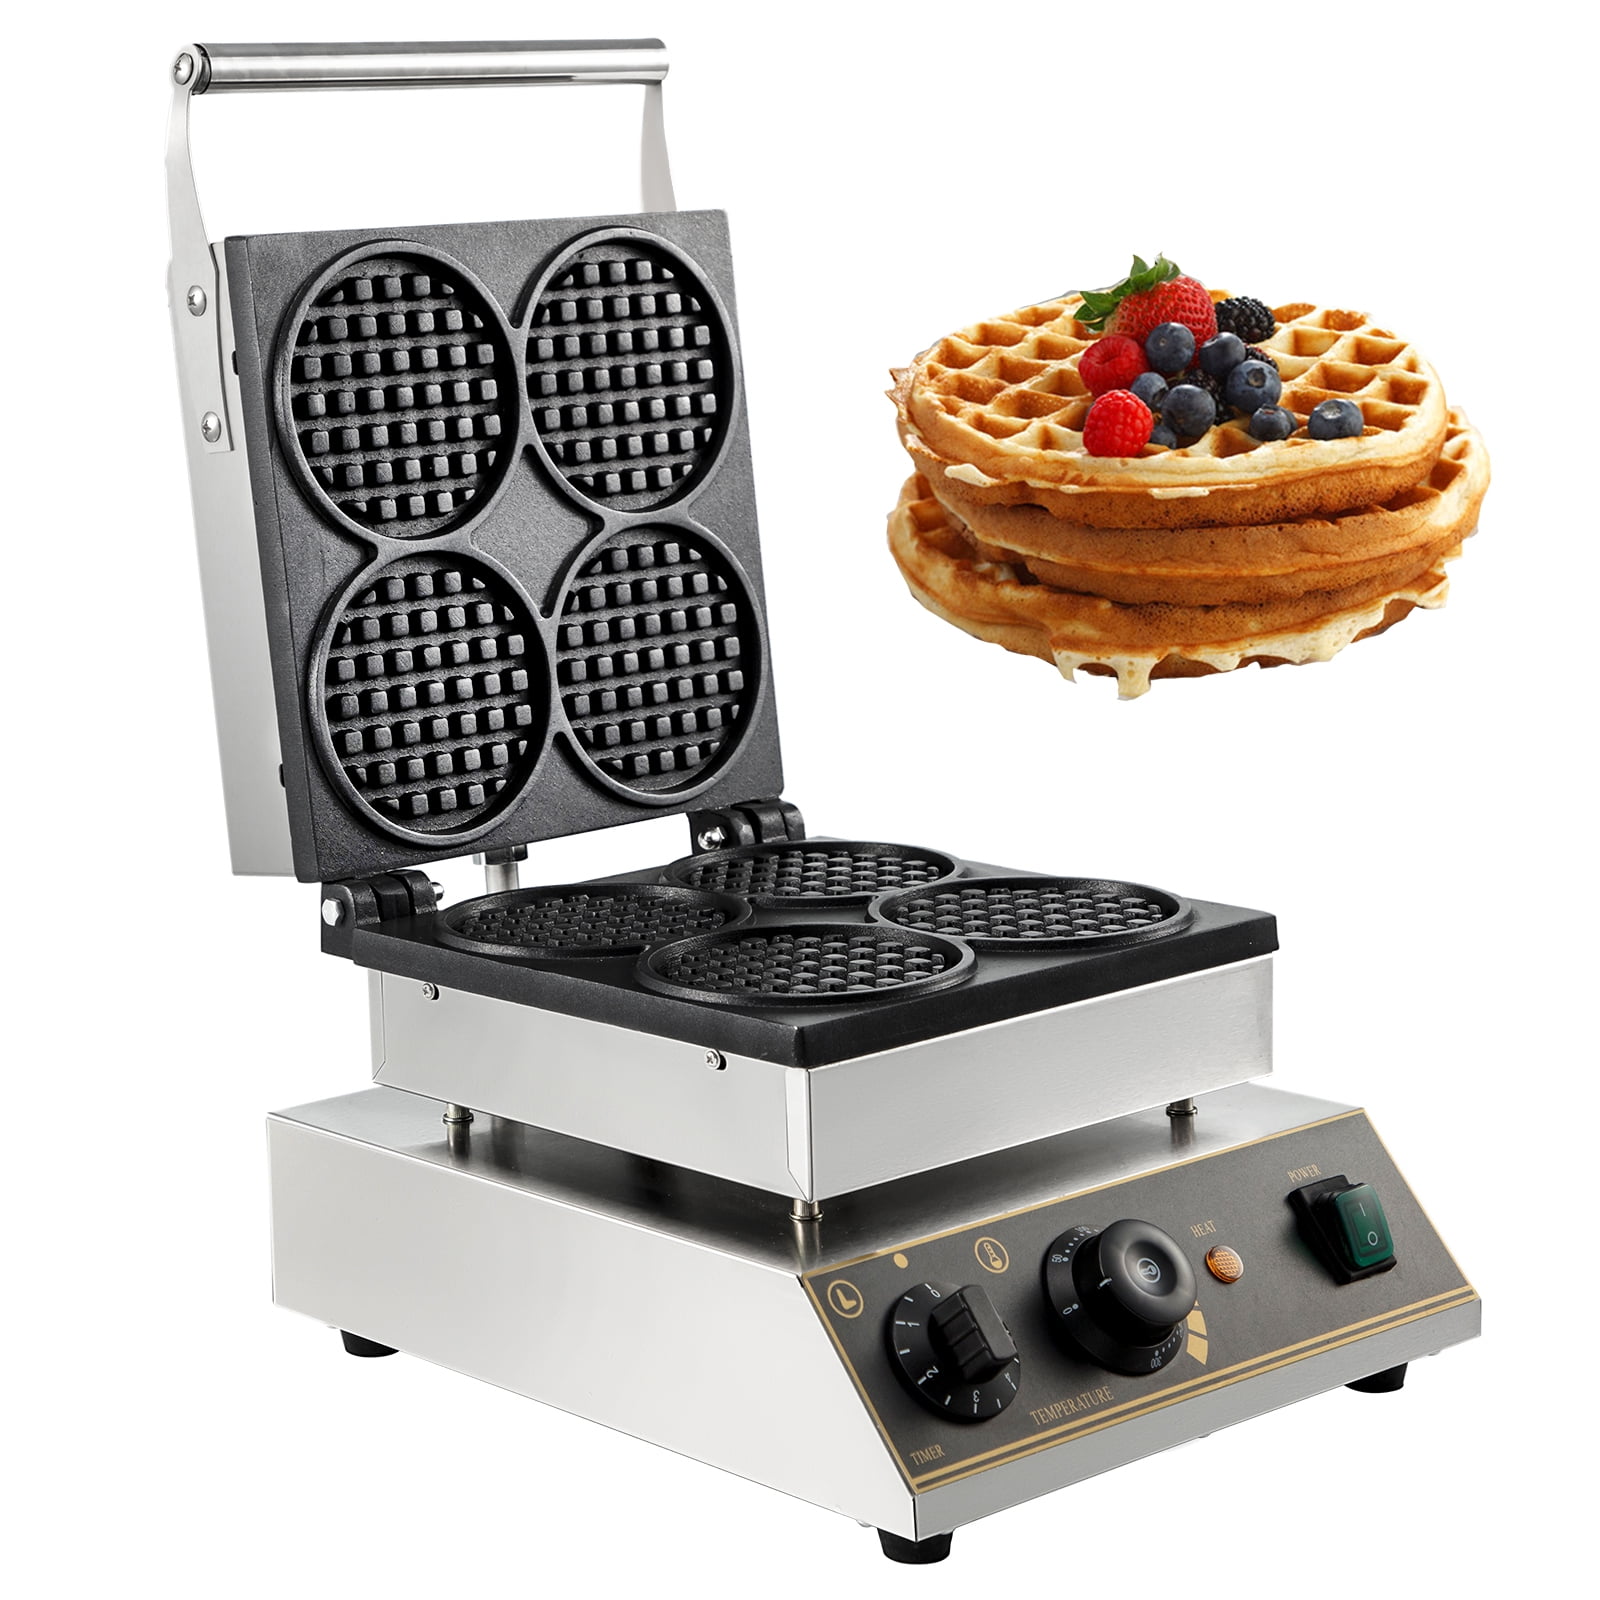 Electric Waffle Maker Non-stick Dessert Baking Tray Adjustable Temperature Control And Stainless Steel Belgian Waffle Maker Waffle In 5 Minutes 